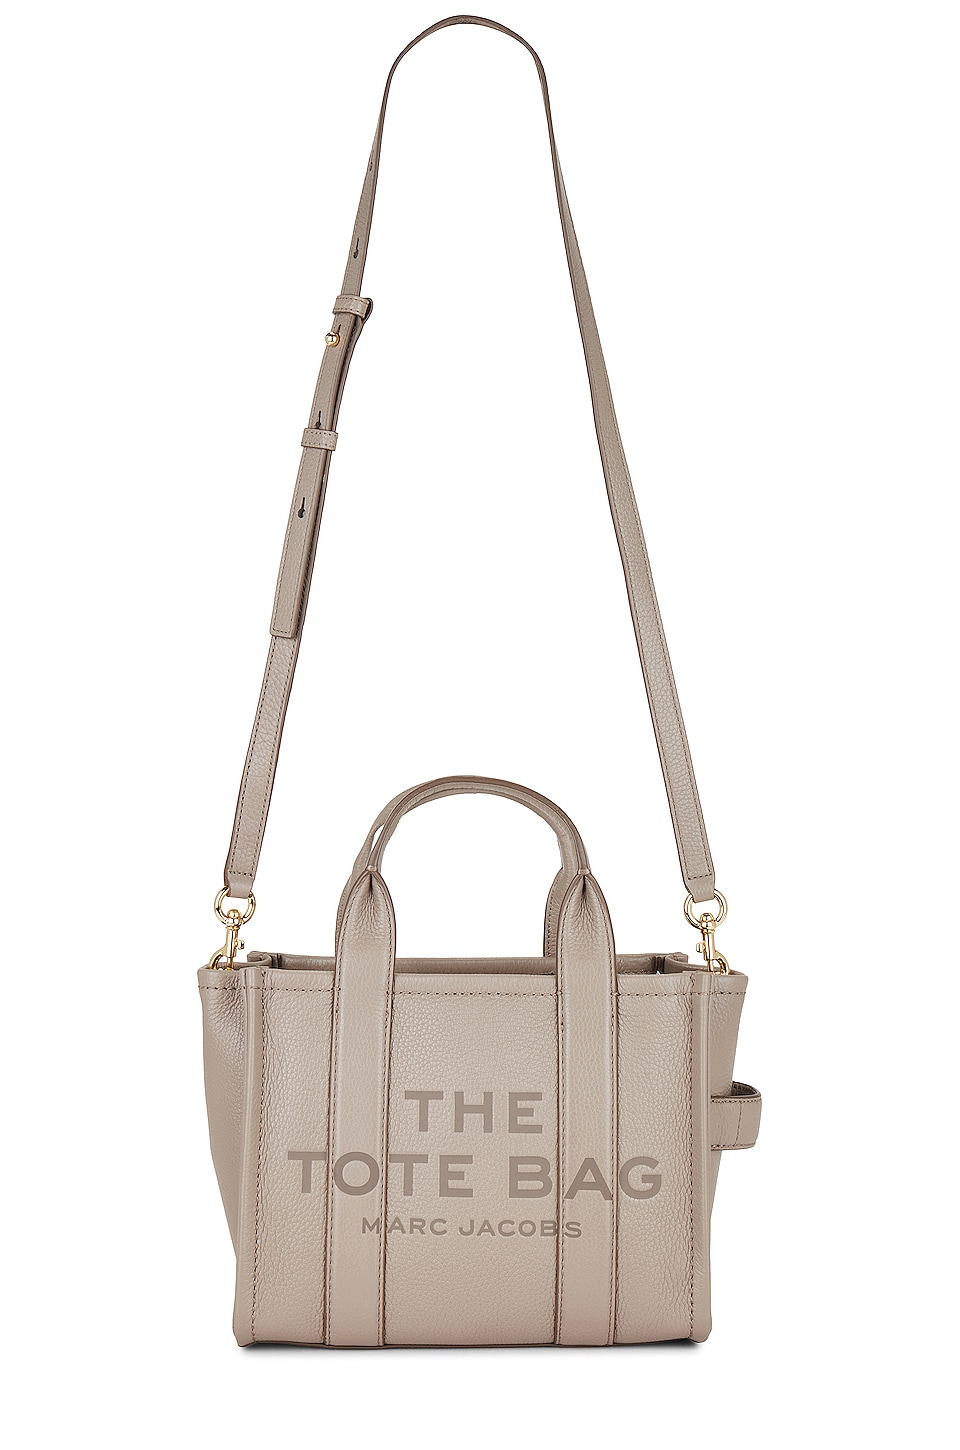 The Leather Small Tote Bag